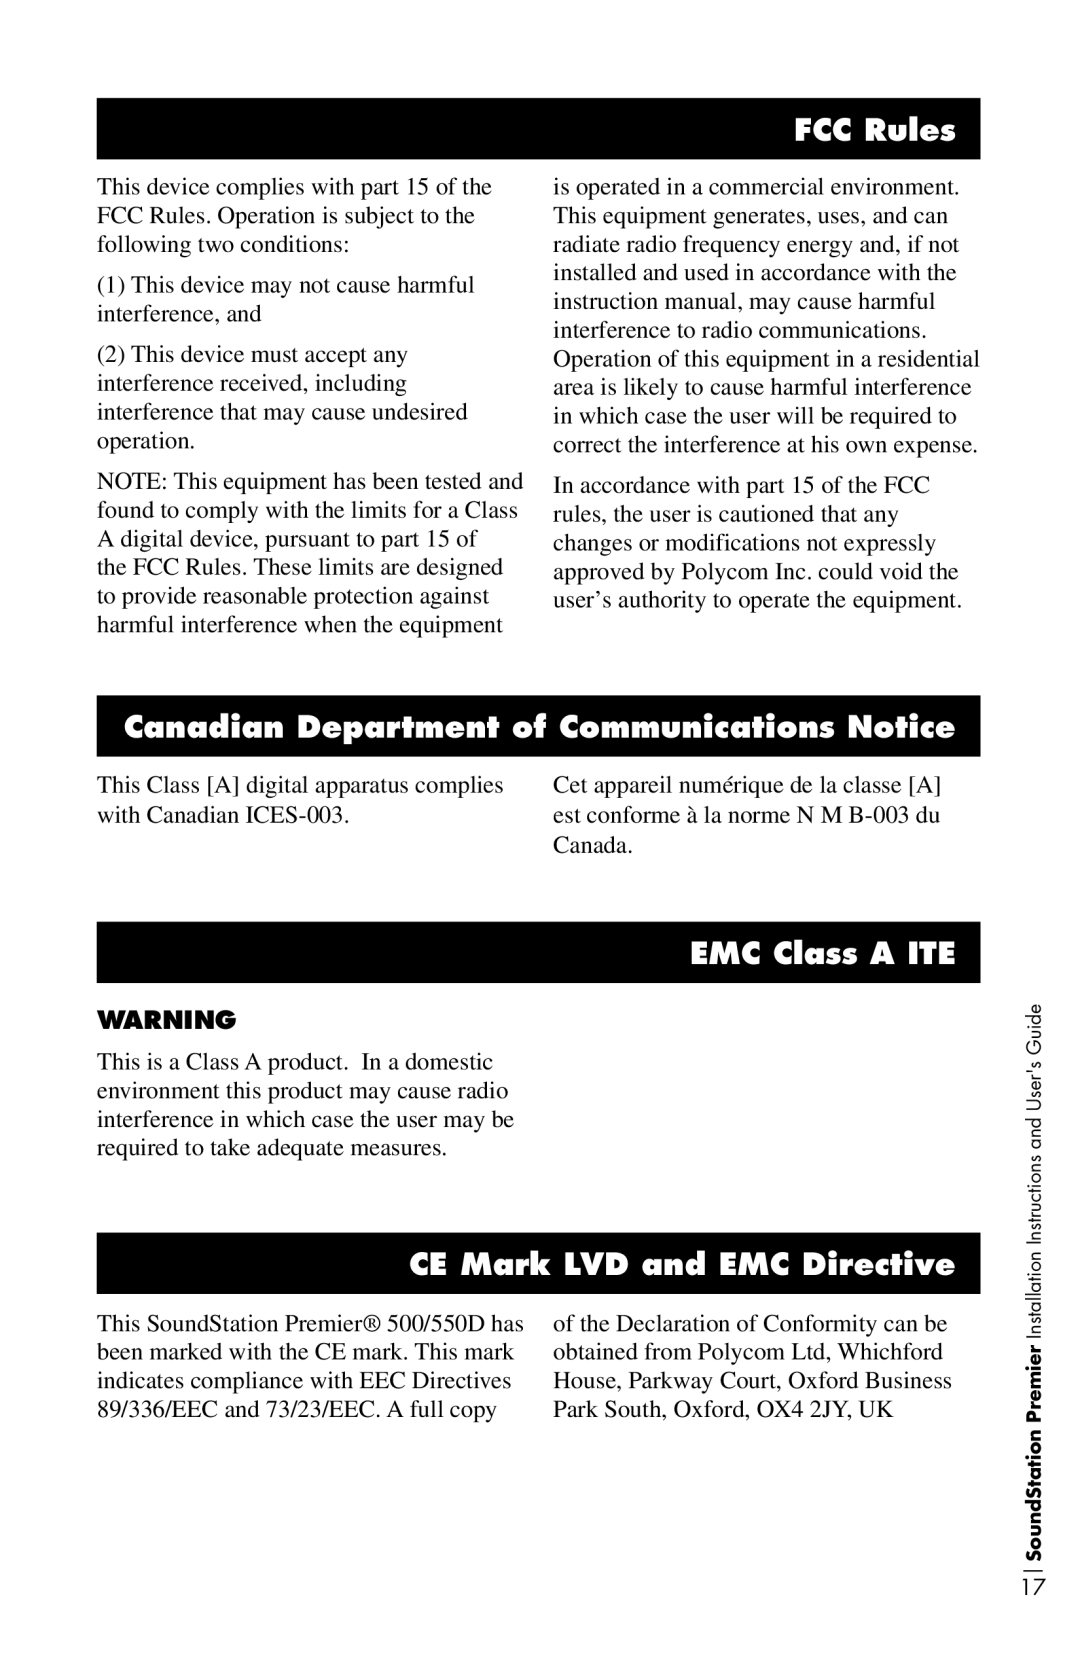 Polycom 550D, 500D FCC Rules, Canadian Department of Communications Notice, EMC Class a ITE, CE Mark LVD and EMC Directive 